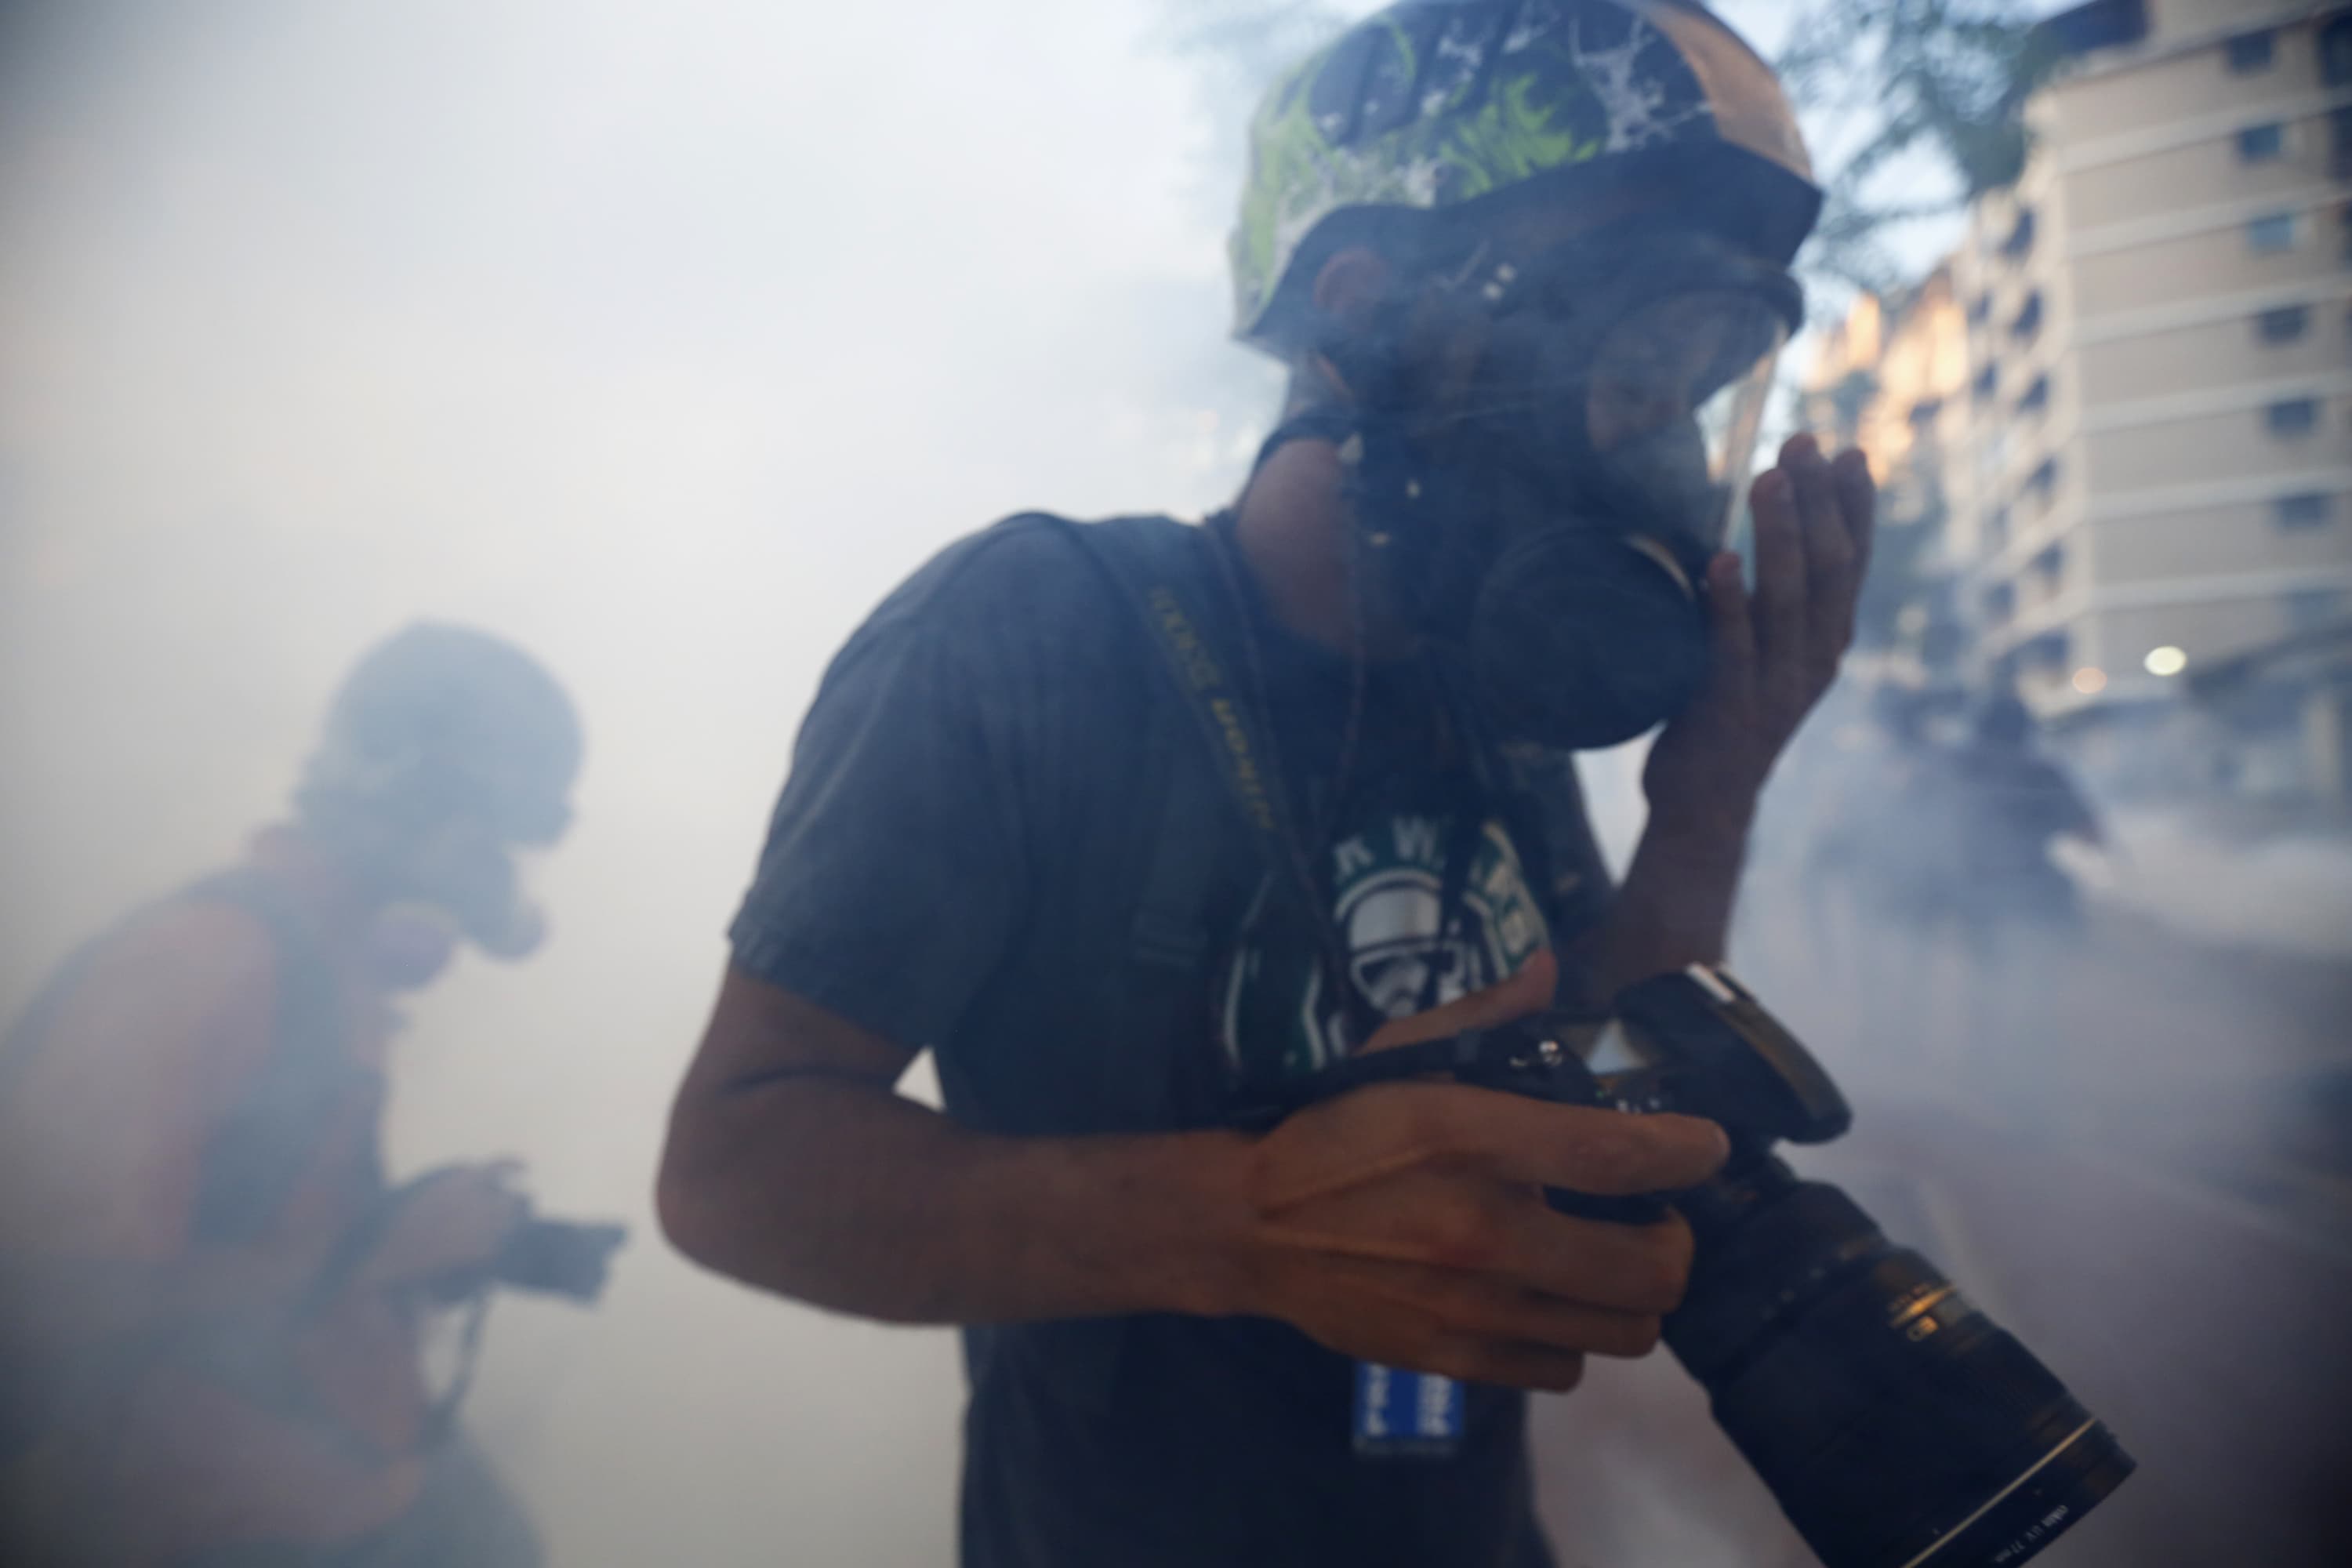 Photographers walk through tear gas during an anti-government protest in Caracas, 2 March 2014, REUTERS/Jorge Silva